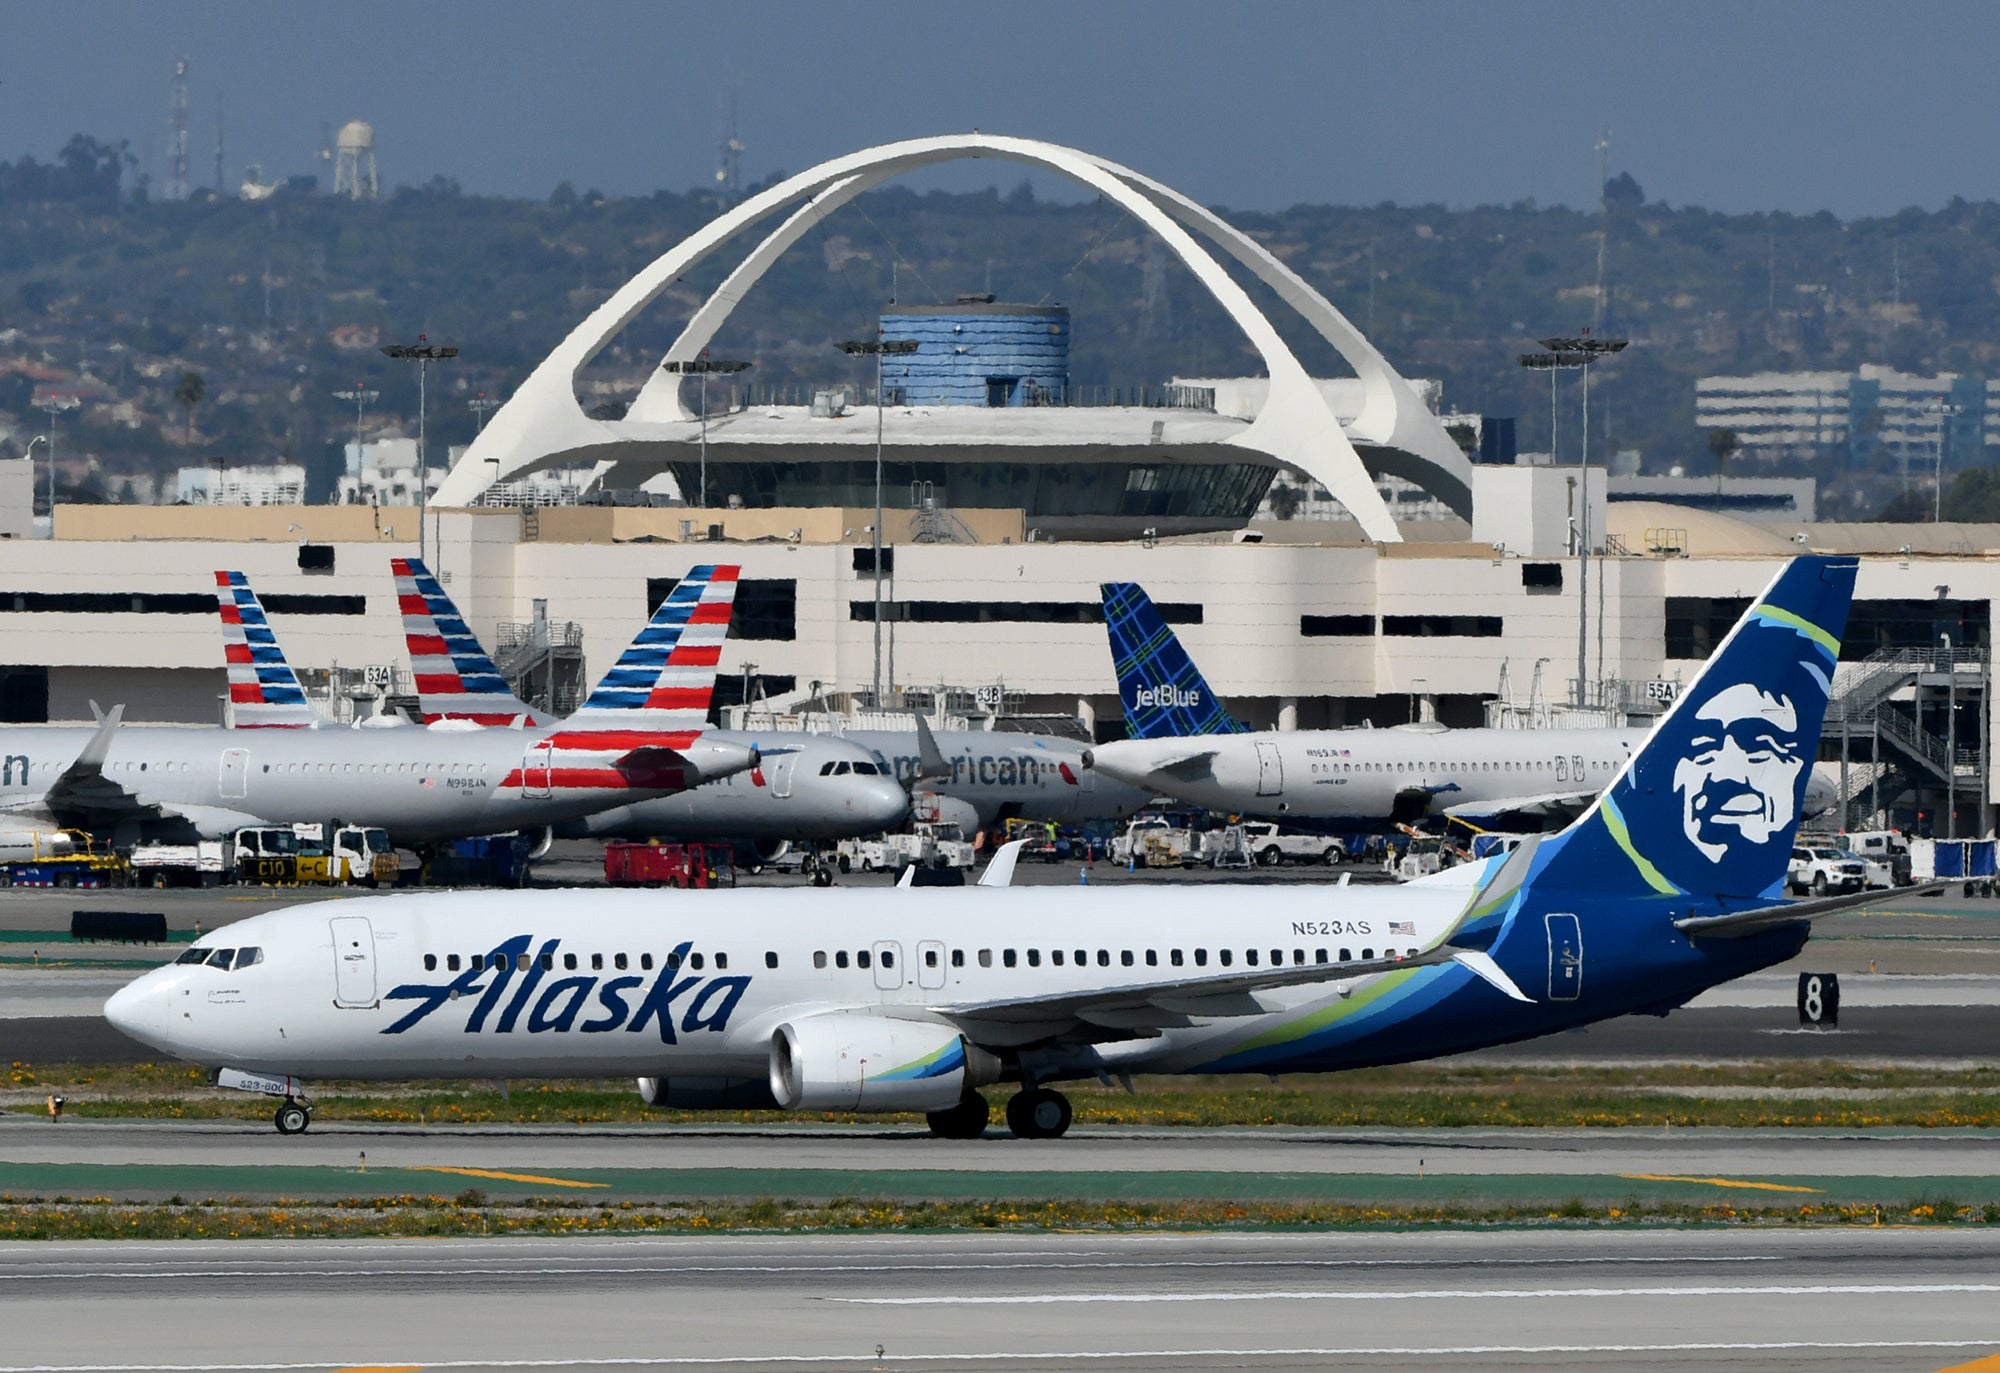 Alaska Airlines, American and JetBlue at LAX